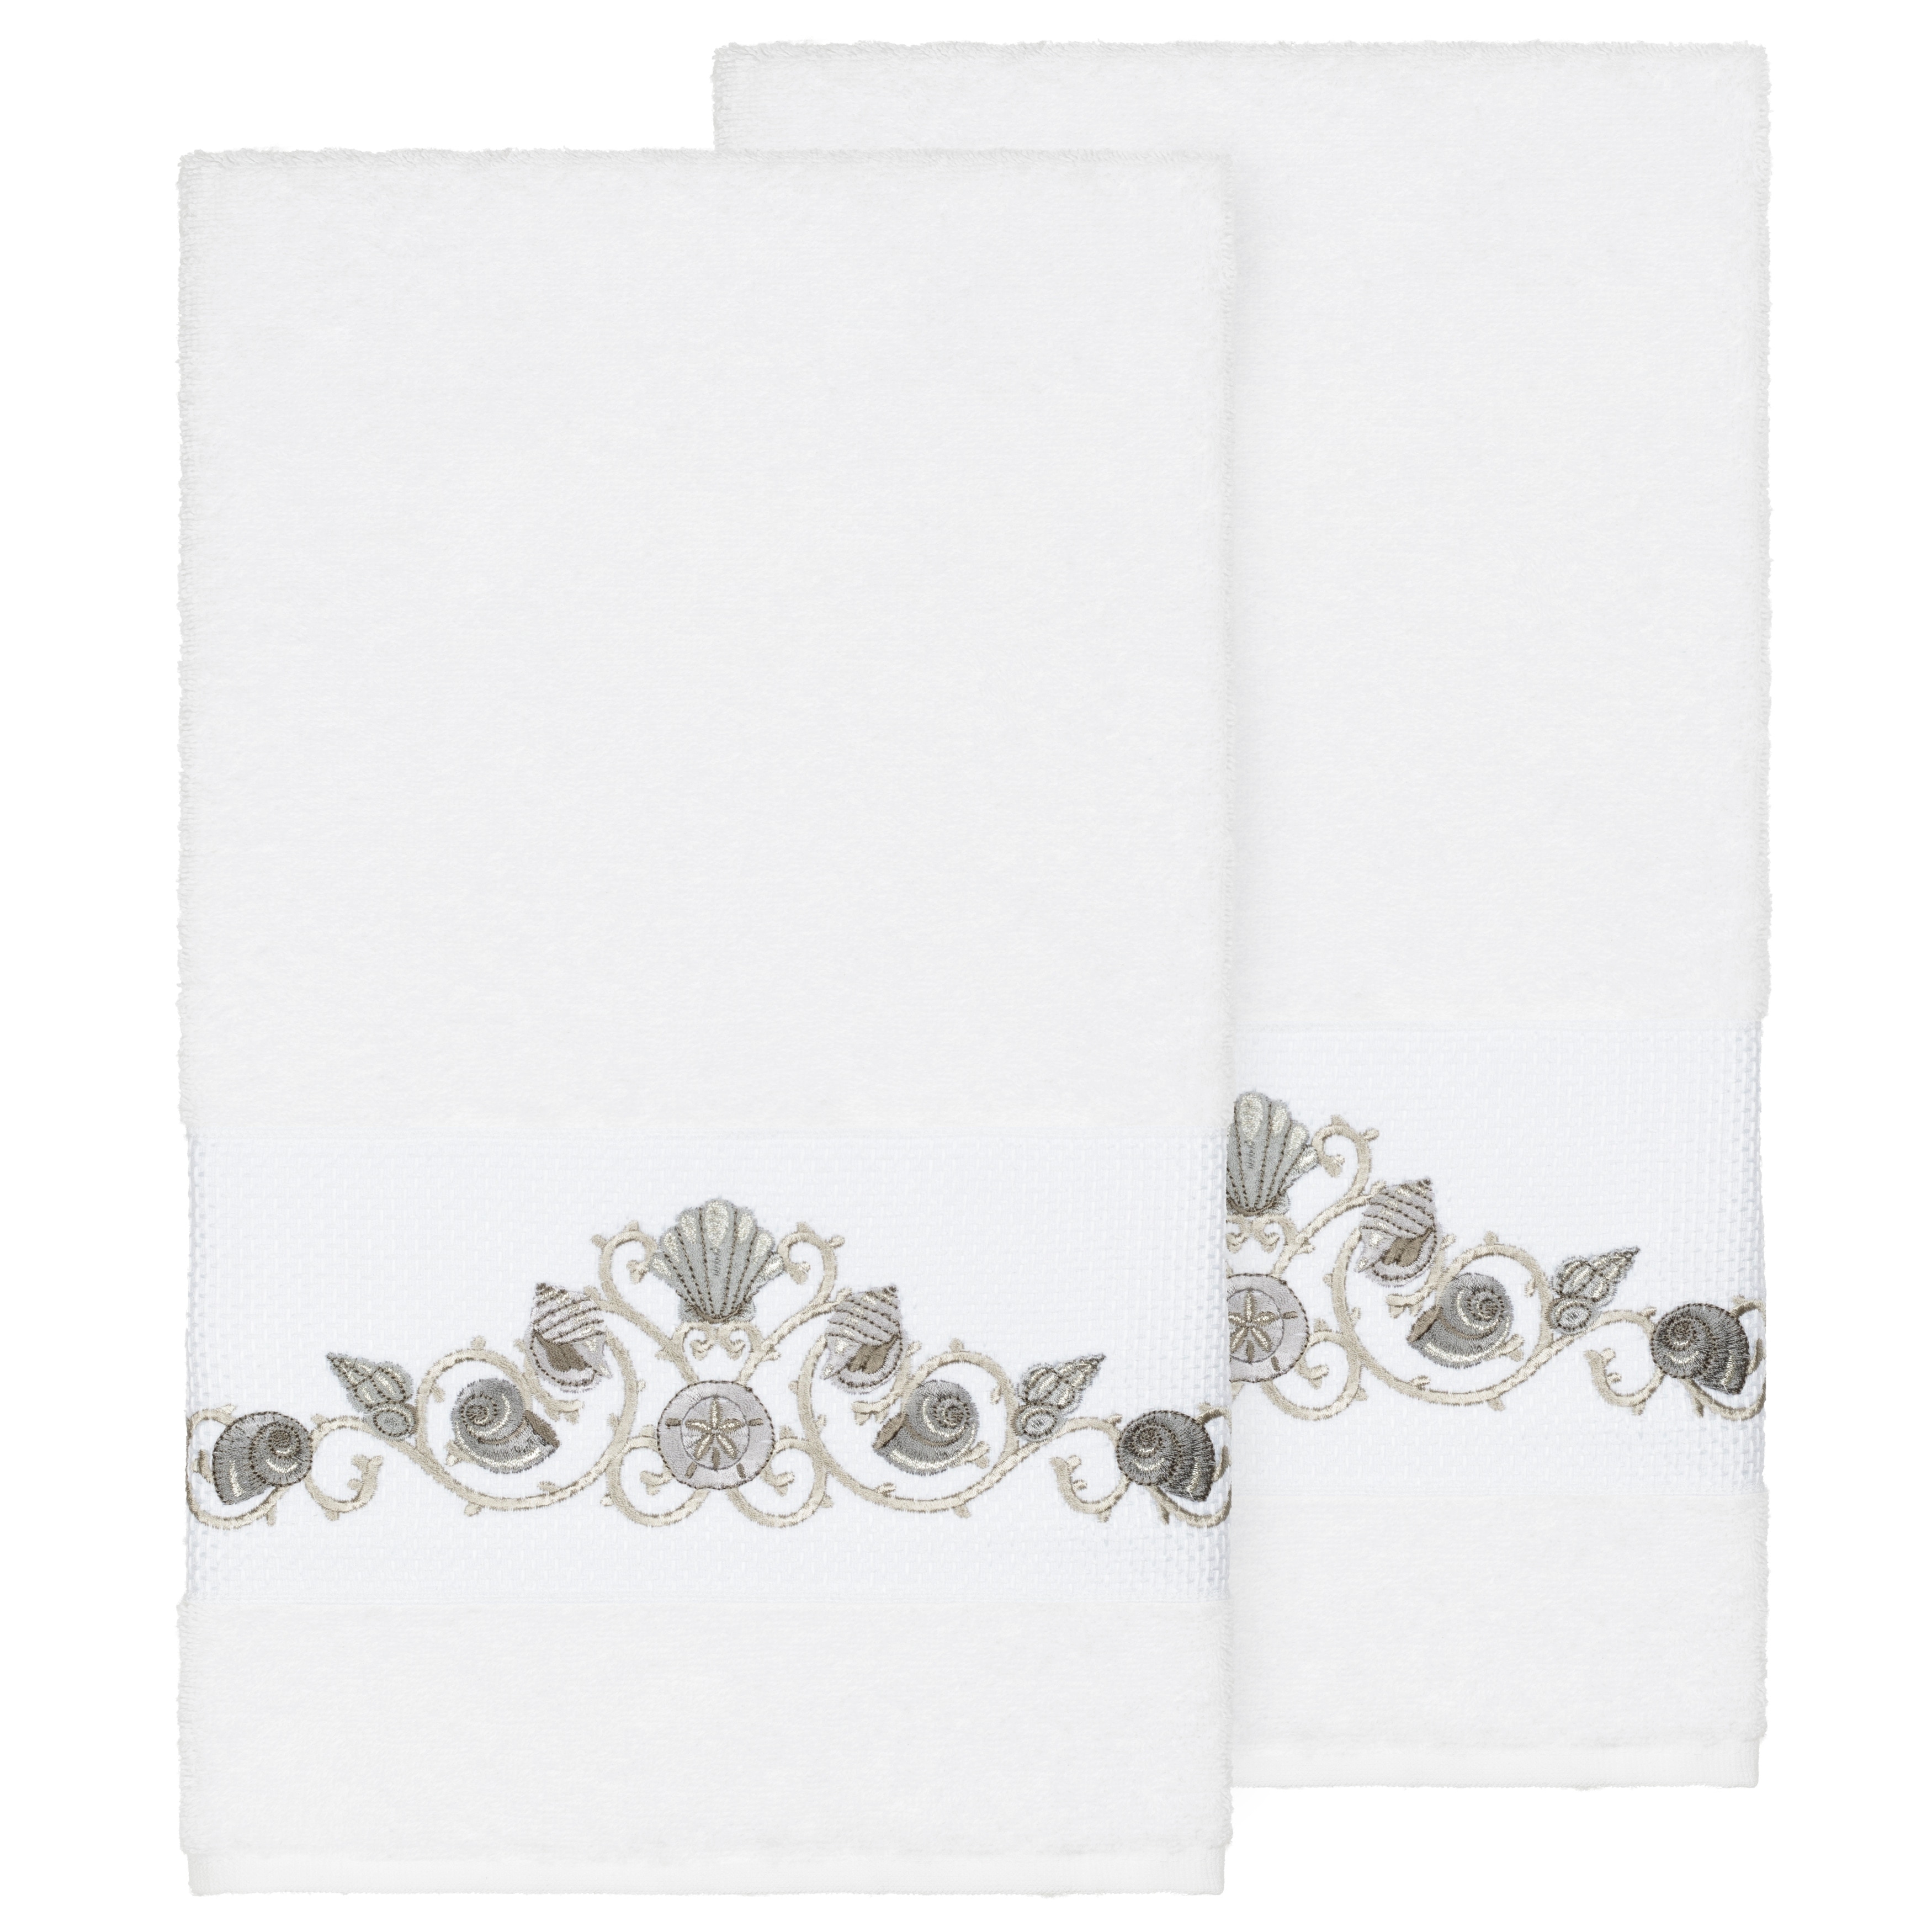 https://ak1.ostkcdn.com/images/products/21853752/Authentic-Hotel-and-Spa-Turkish-Cotton-Shells-Embroidered-White-2-piece-Bath-Towel-Set-dd4b24ca-5f48-4636-8ce8-d41107a02946.jpg